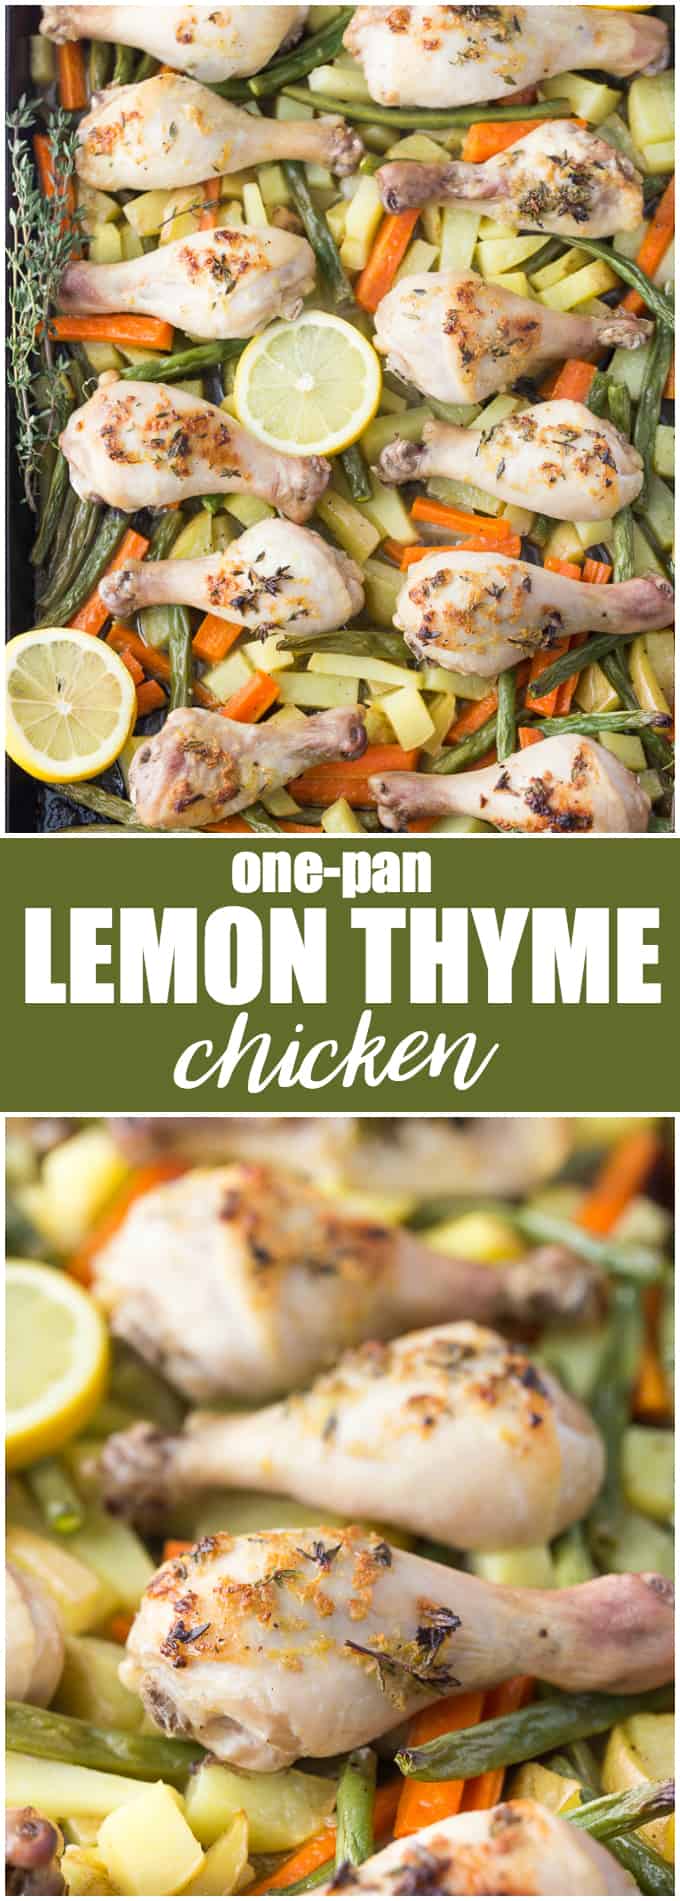 One-Pan Lemon Thyme Chicken - Tender, flavourful chicken drumsticks covered in a lemon/herb butter spread are roasted to perfection along with carrots, potatoes and green beans on one pan! You'll love how easy it is to make and clean.